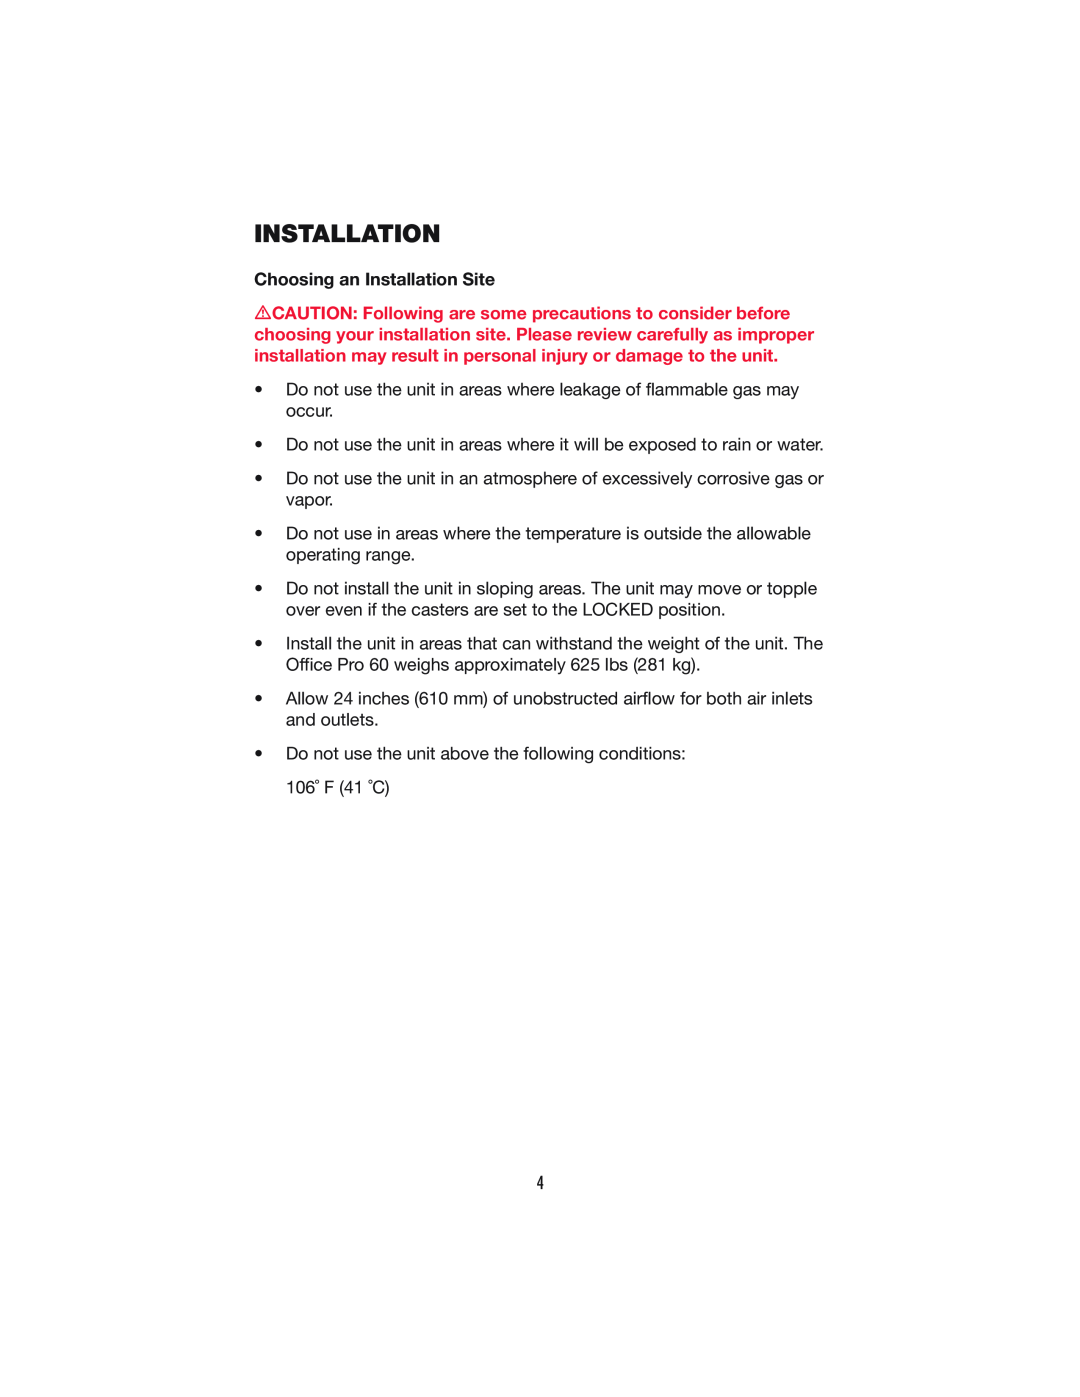 Denso PRO 60 operation manual Choosing an Installation Site 